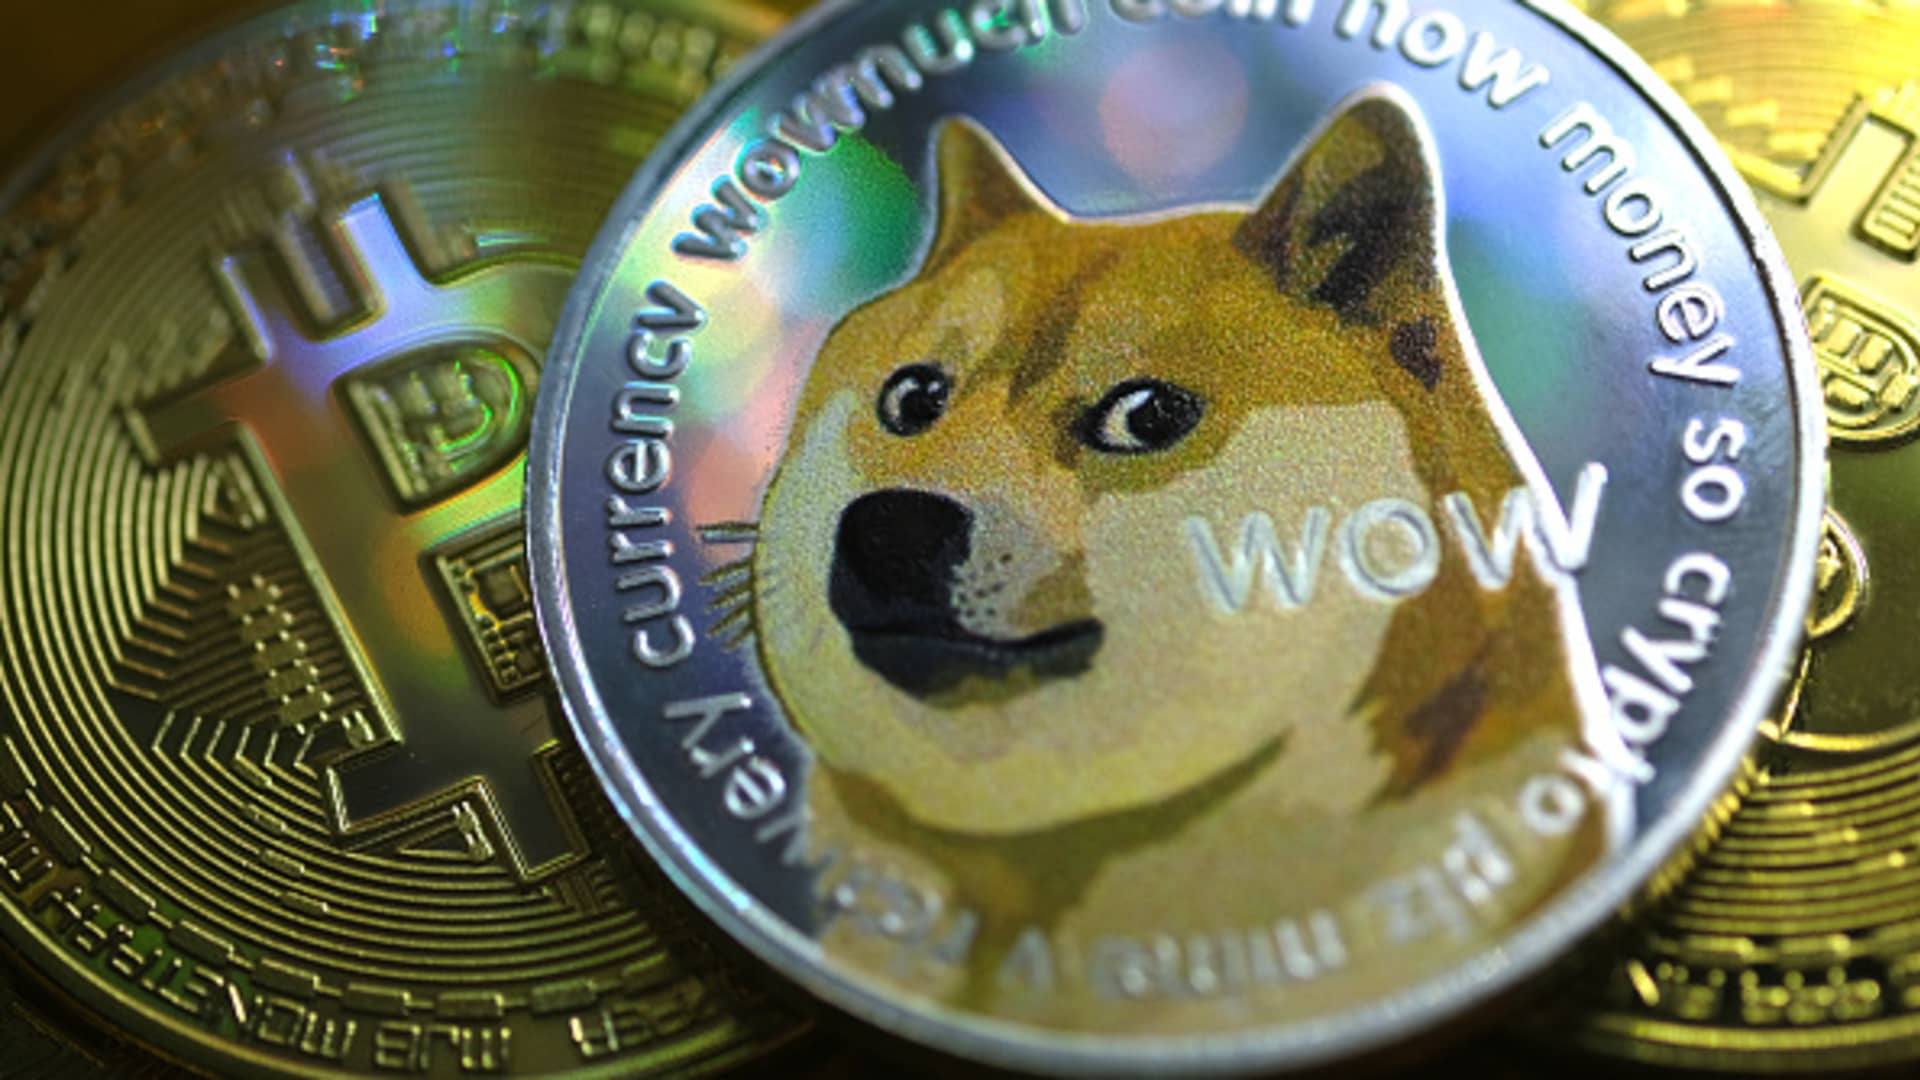 A visual representation of digital cryptocurrencies Dogecoin and Bitcoin.